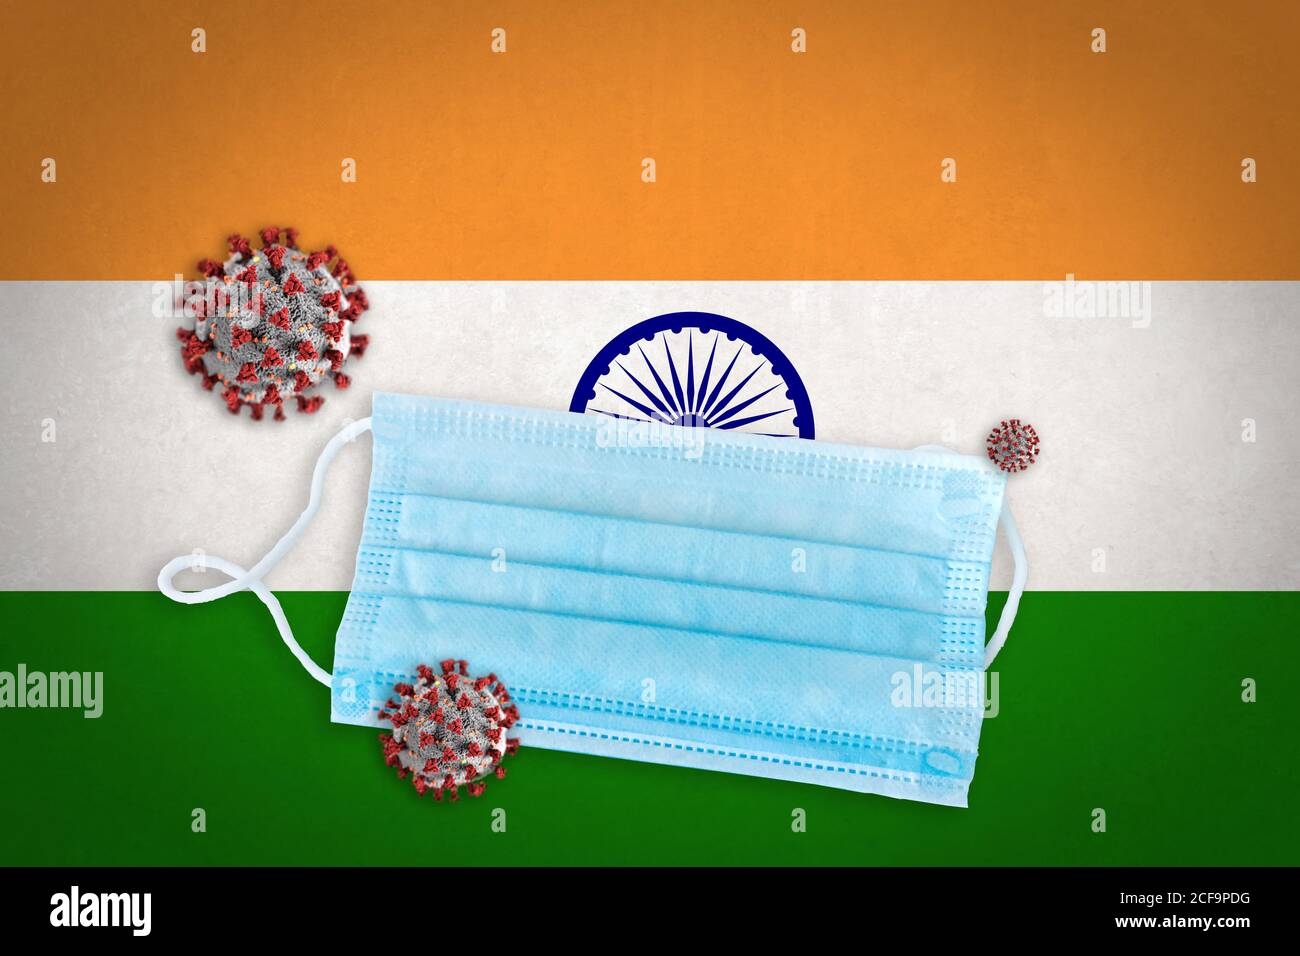 Concept of Coronavirus or Covid-19 particles and surgical face mask over flag of India in background. Stock Photo